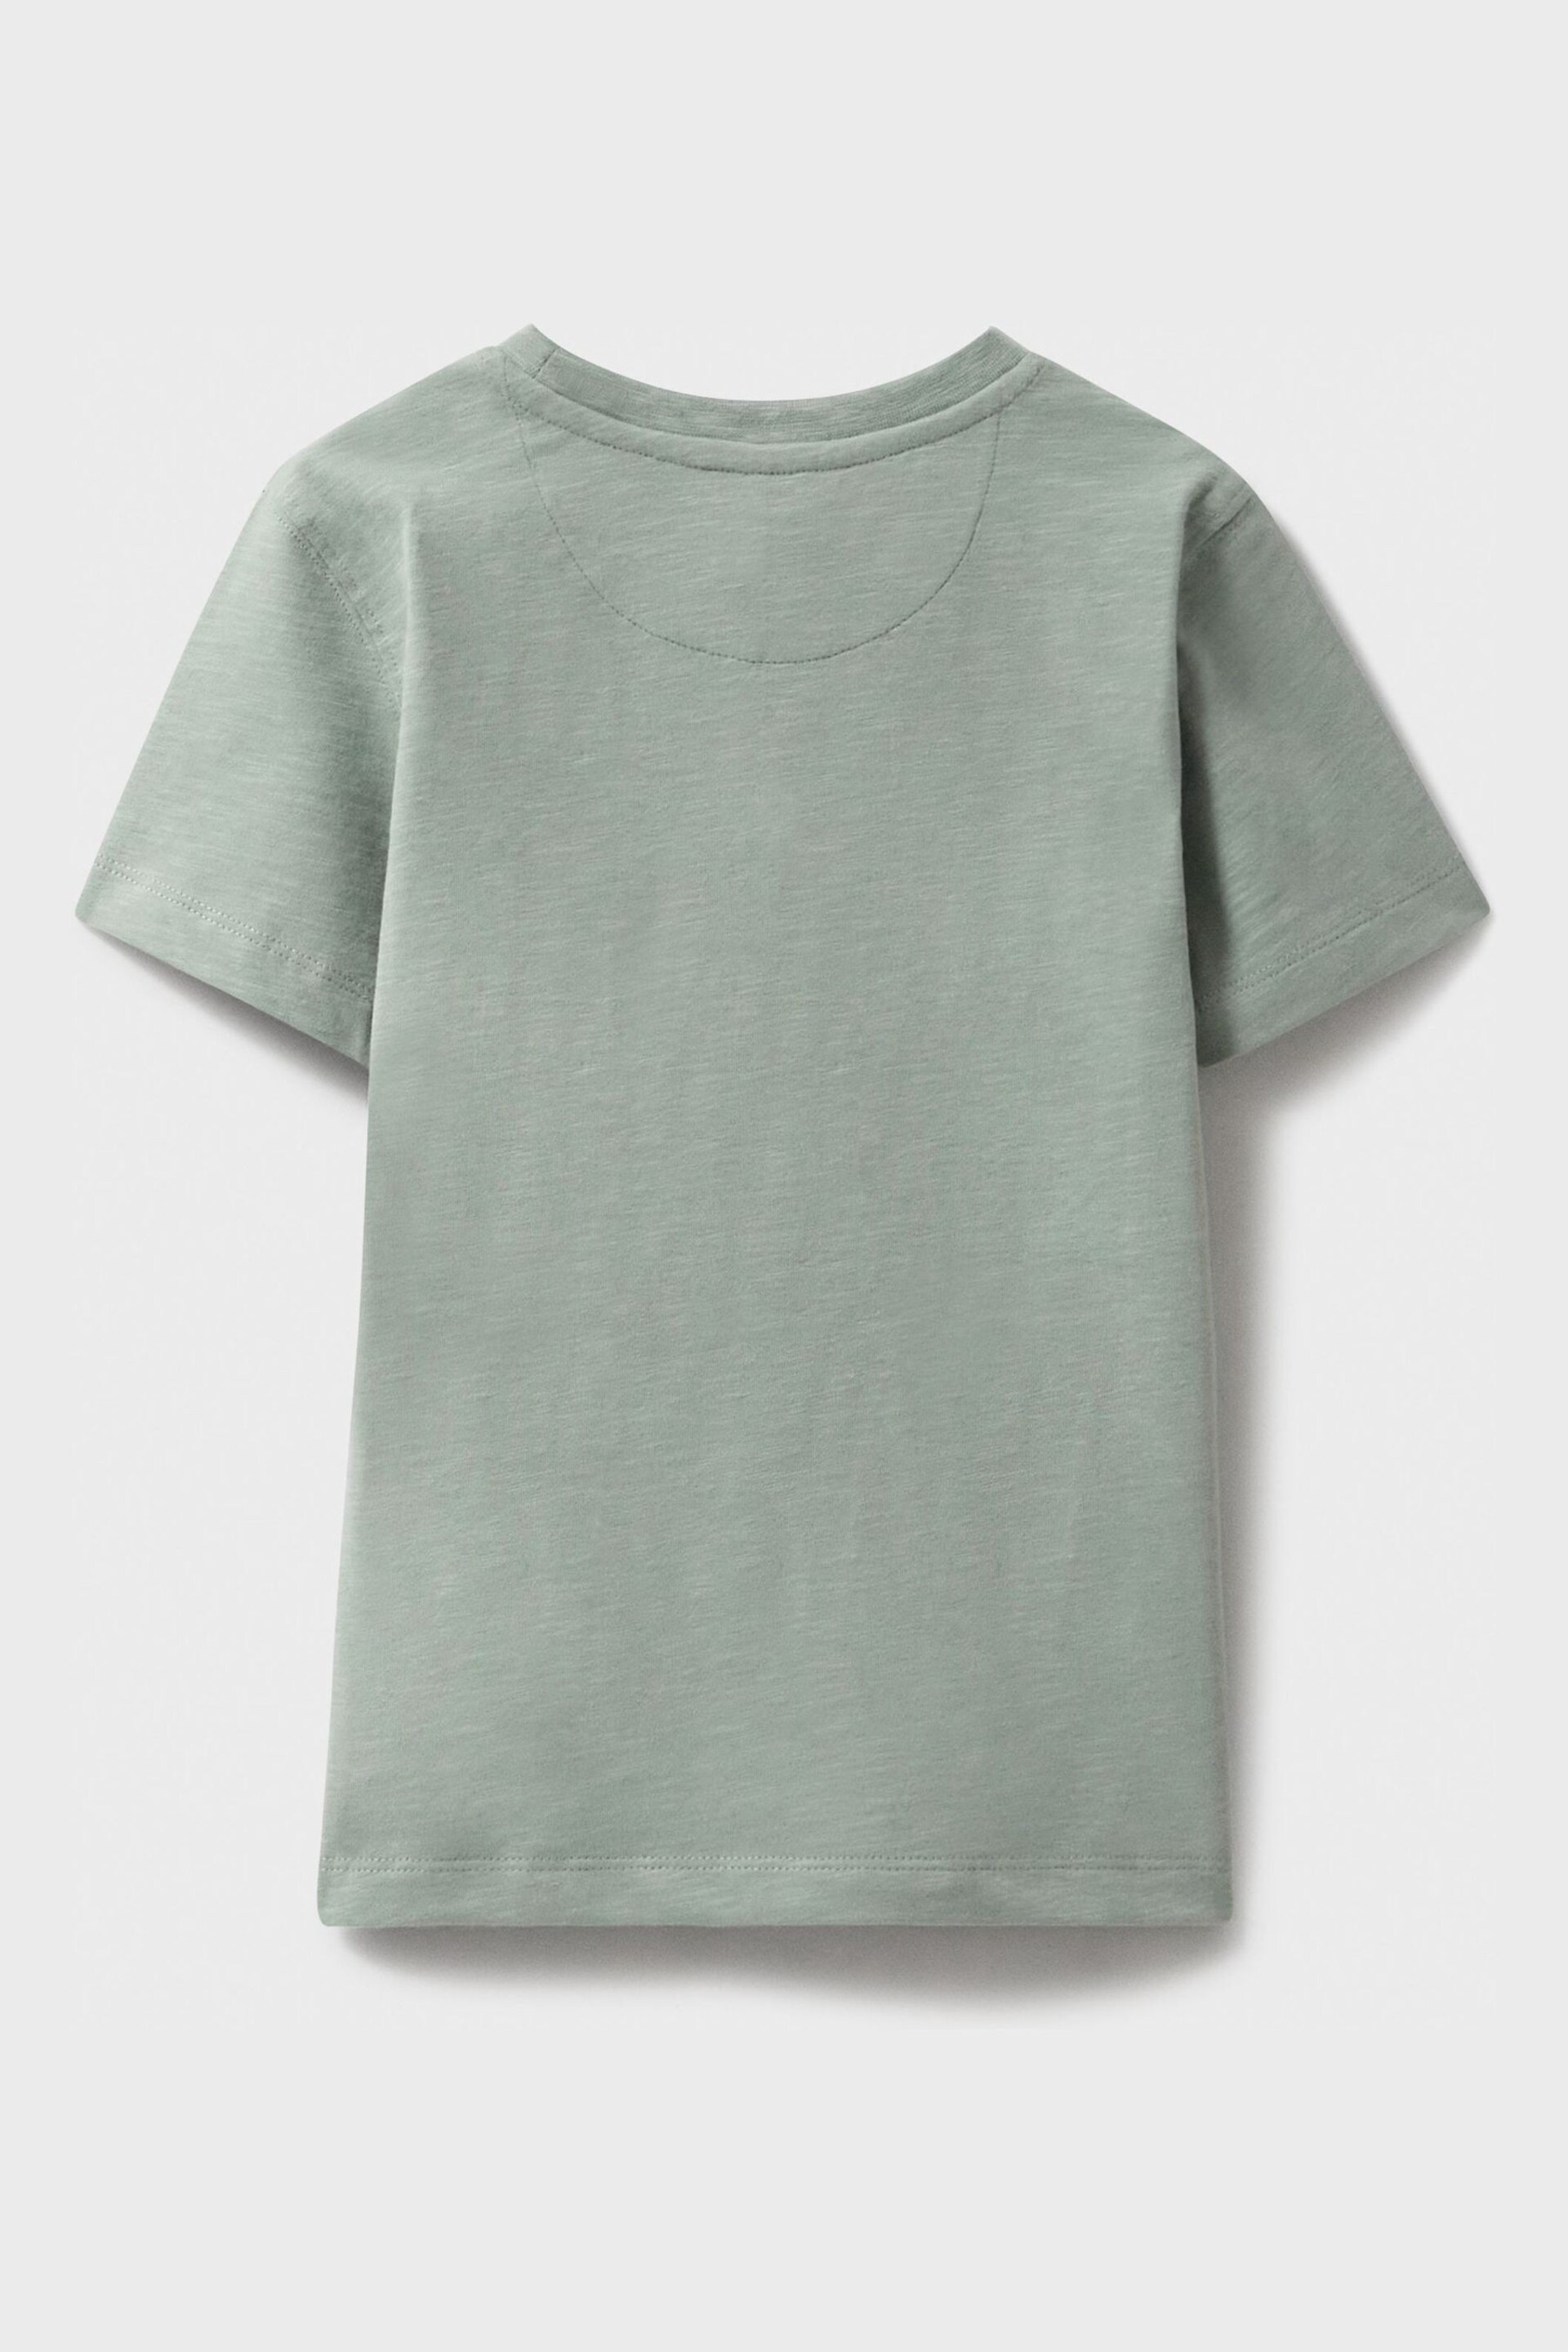 Crew Clothing Company Green Cotton Classic T-Shirt - Image 2 of 3